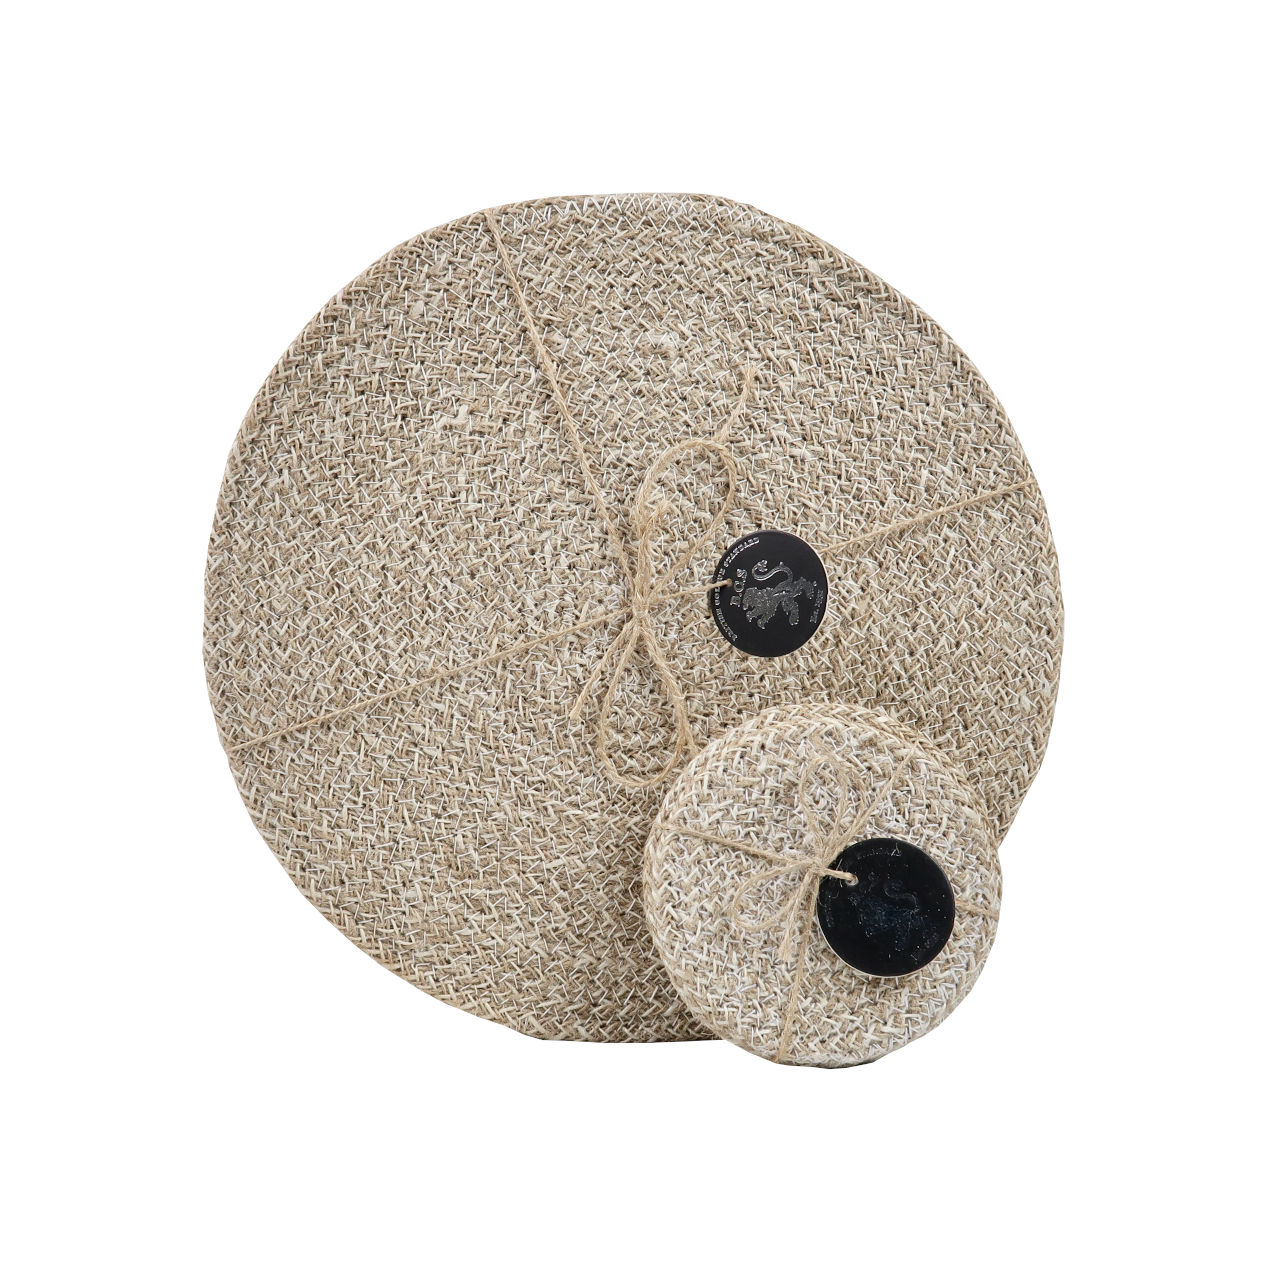 British Colour Standard Set of 4 Pearl White Woven Jute Coasters and Place Mats 